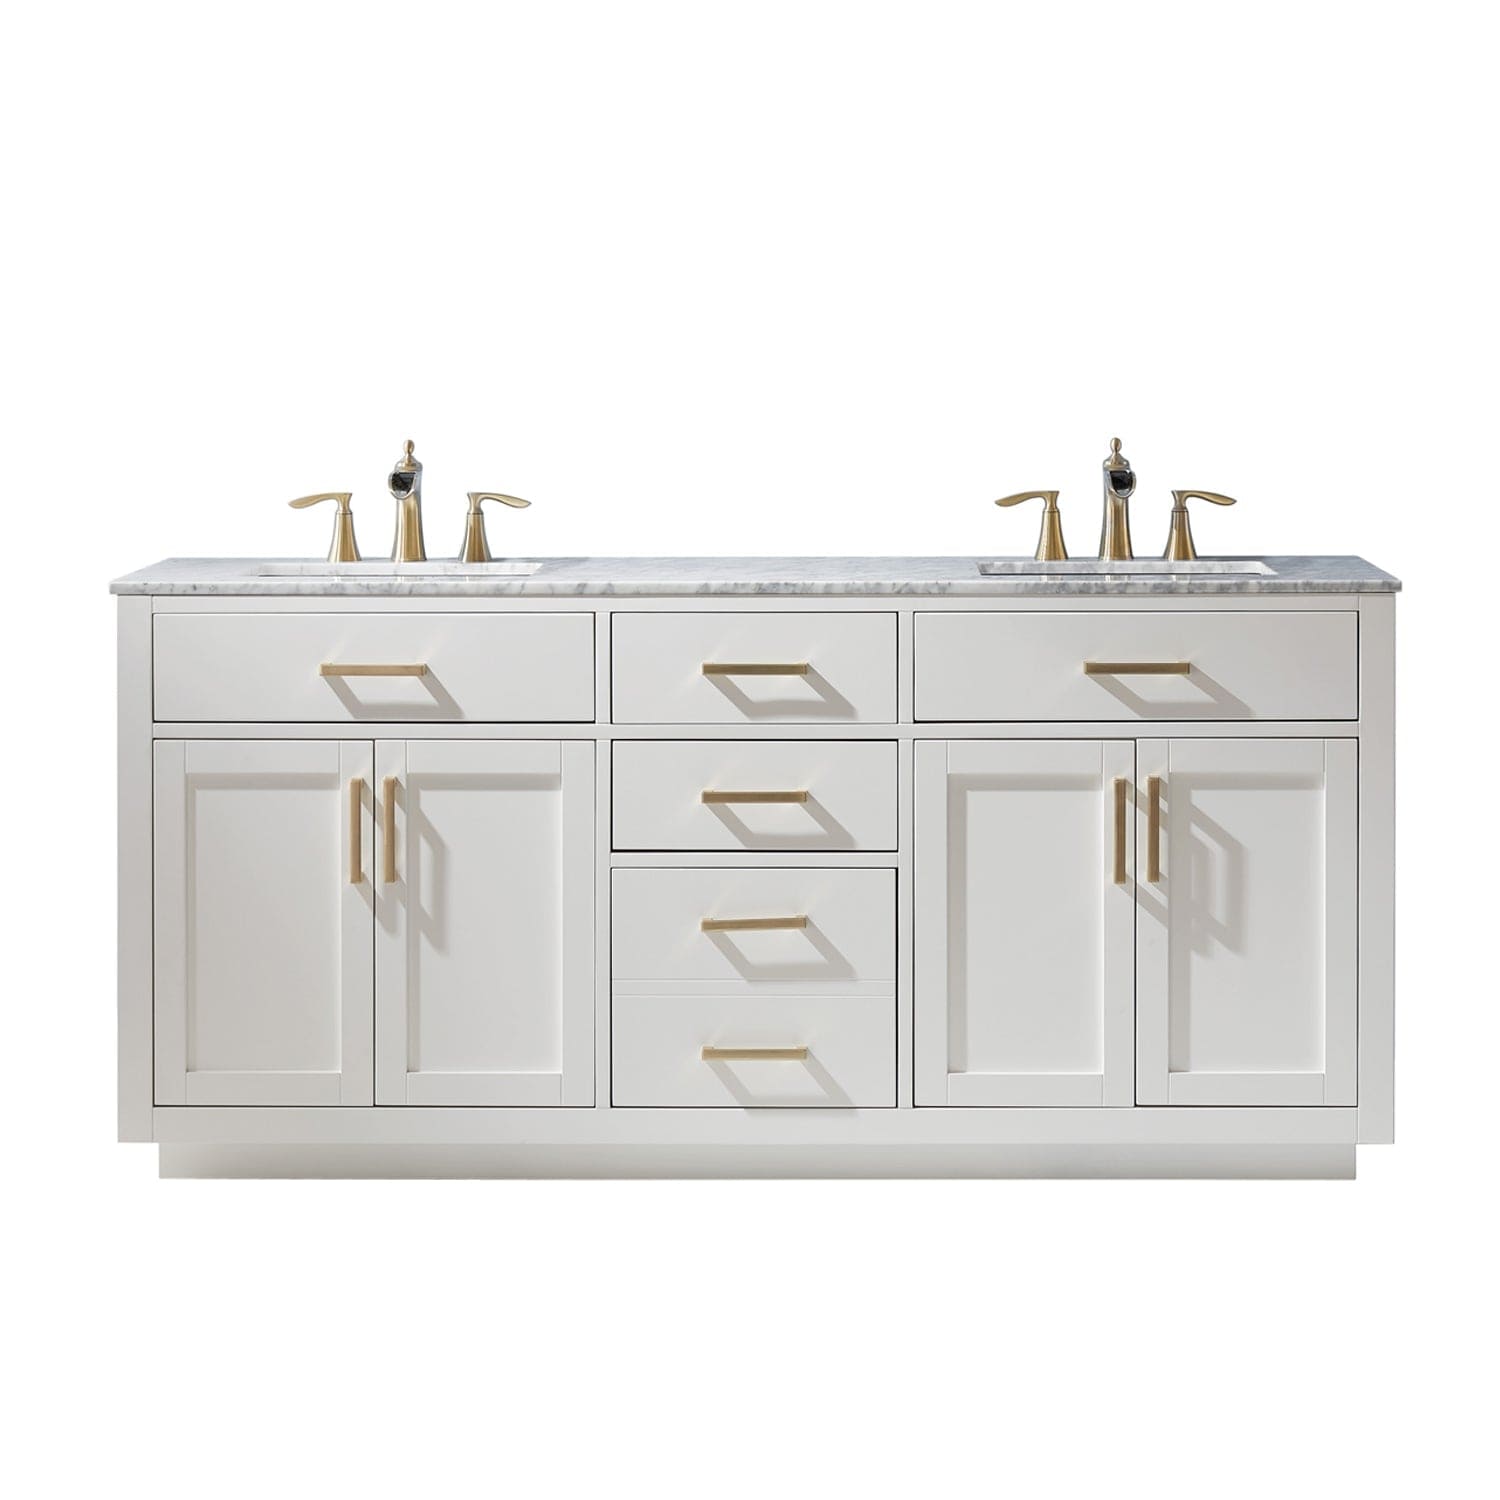 Altair Ivy 72" Double Bathroom Vanity Set in White and Carrara White Marble Countertop without Mirror 531072-WH-CA-NM - Molaix631112971324Vanity531072-WH-CA-NM